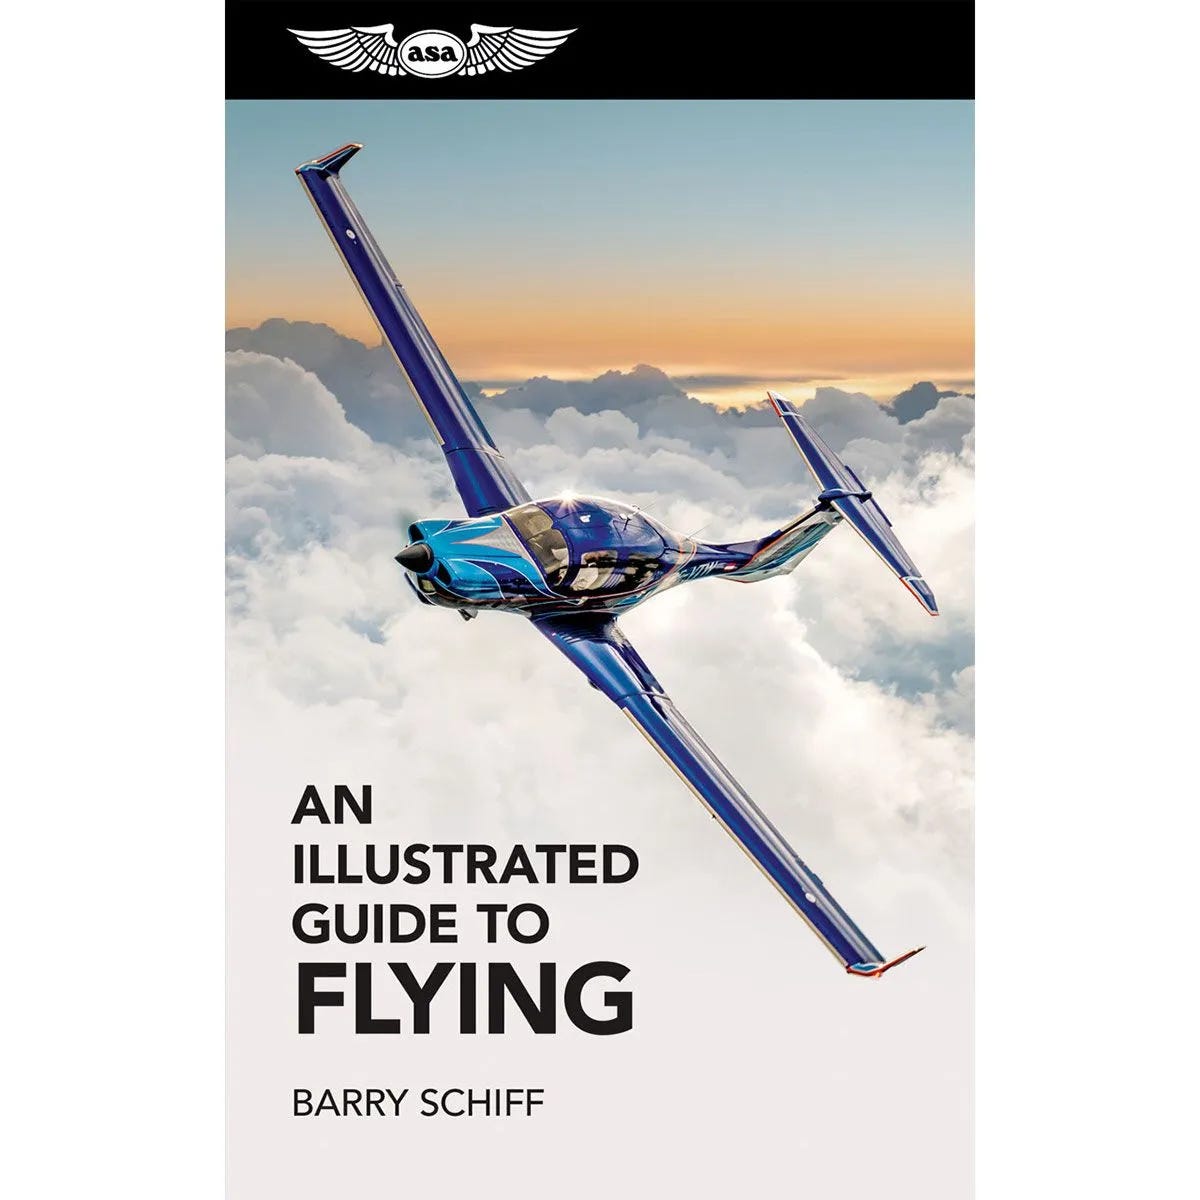 An Illustrated Guide to Flying, by Barry Schiff